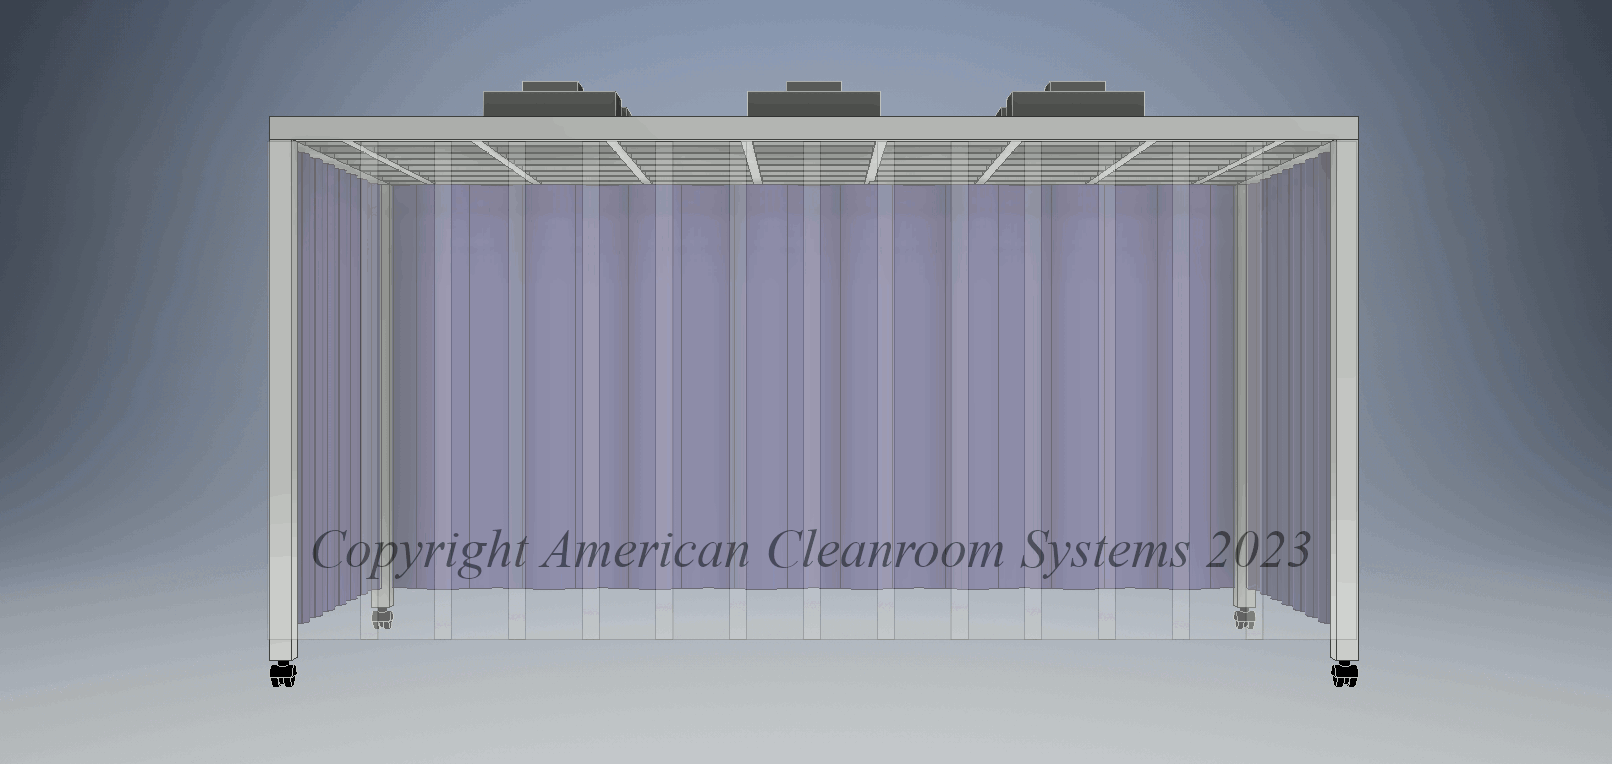 softwall air flow diagram, HEPA fan filter units drawing air from outside cleanroom